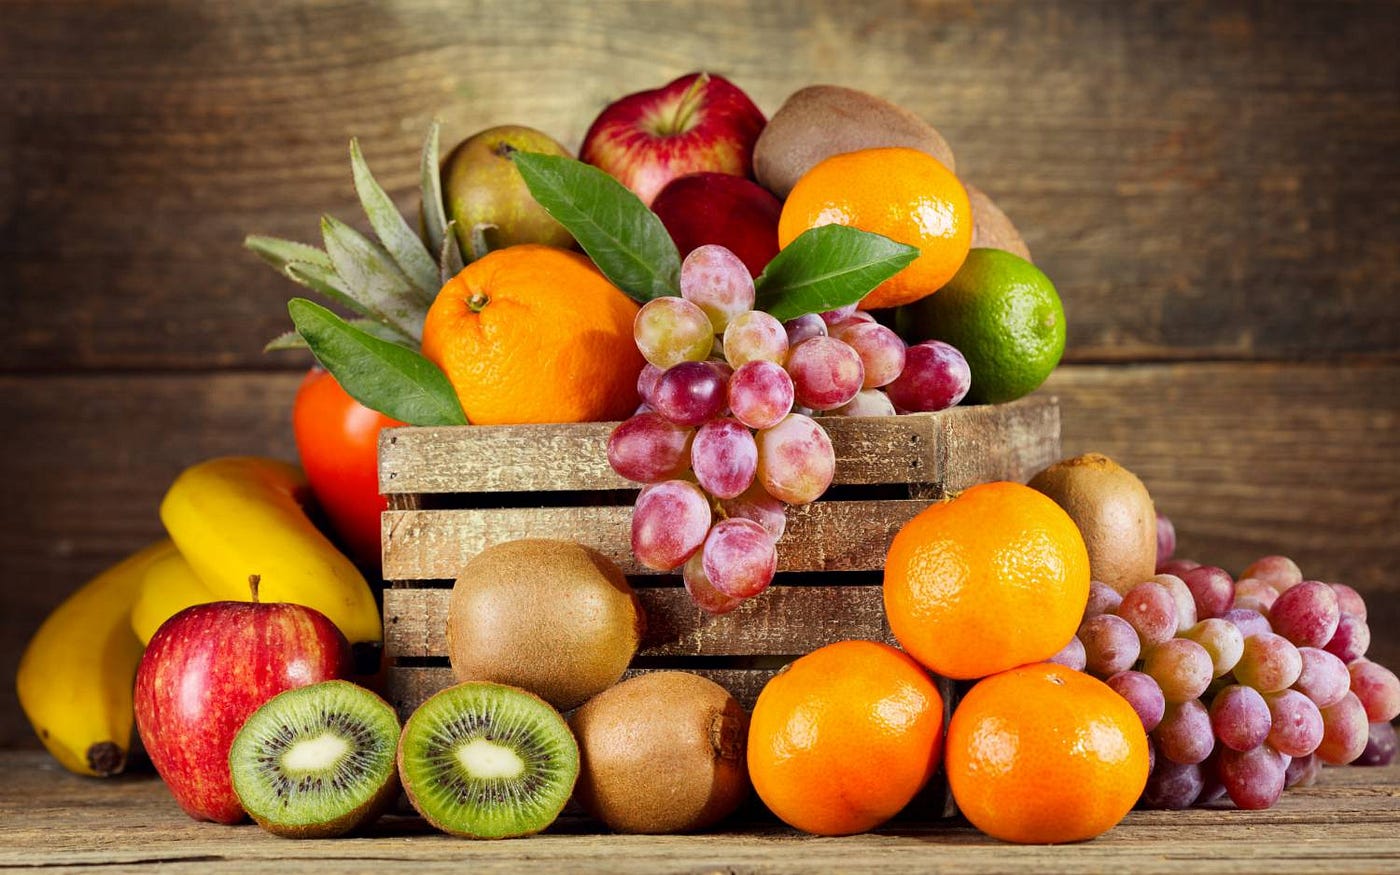 10 Juicy Facts about Fruit and Vegetables